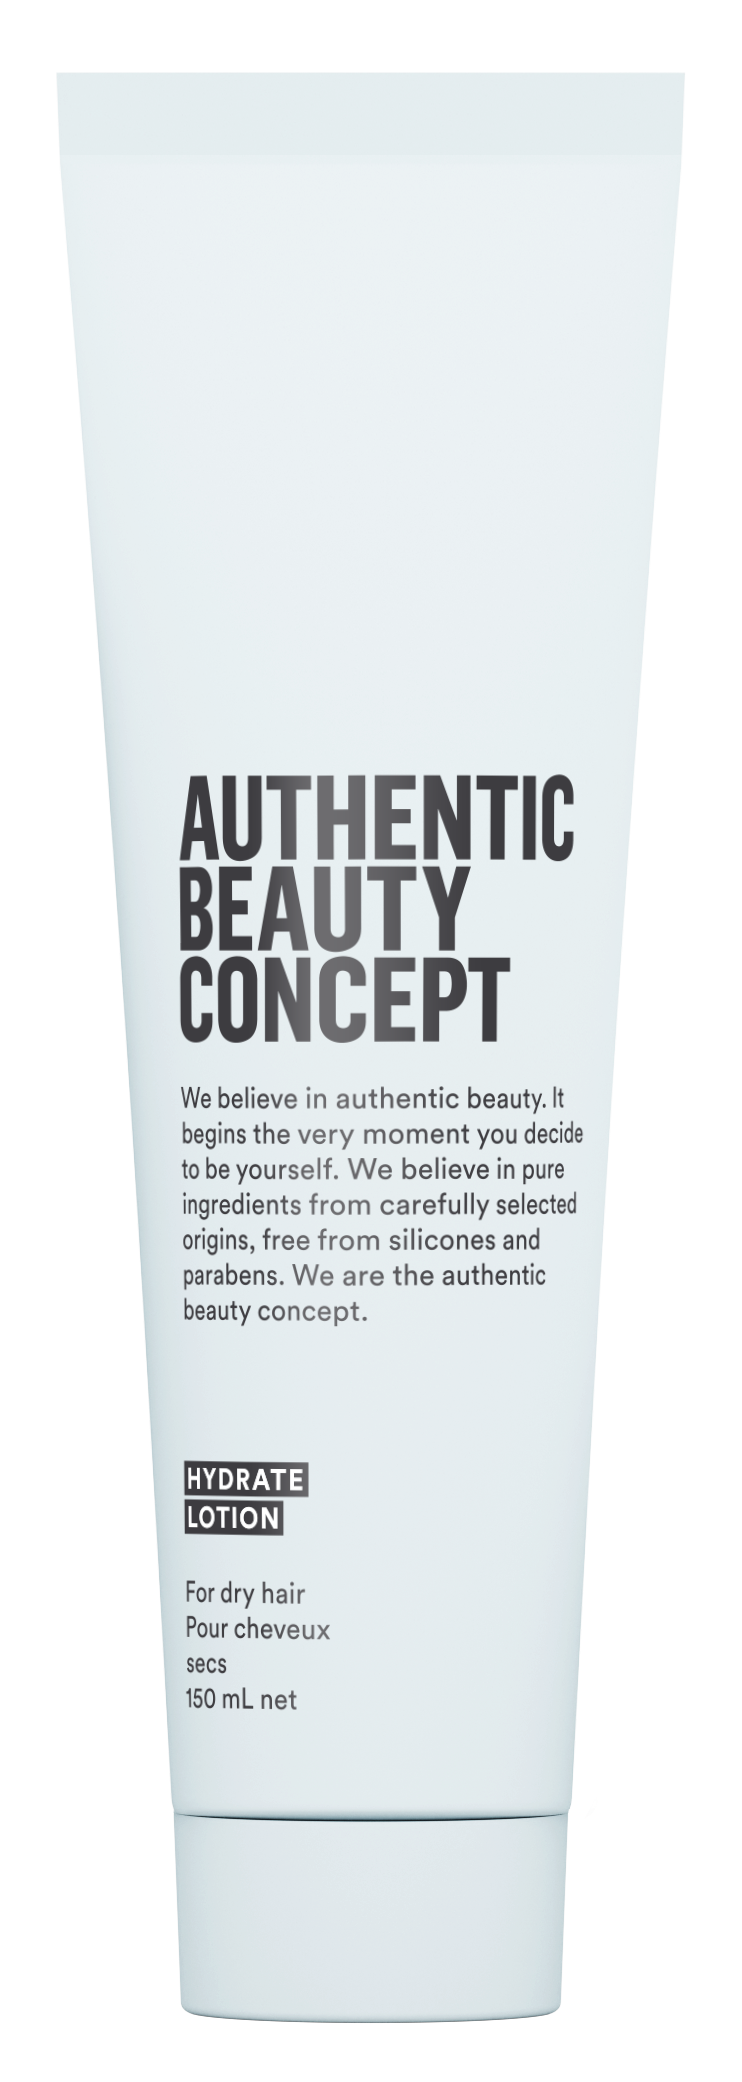 Eds Hair - Authentic Beauty Concept - Hydrate Lotion 150ml